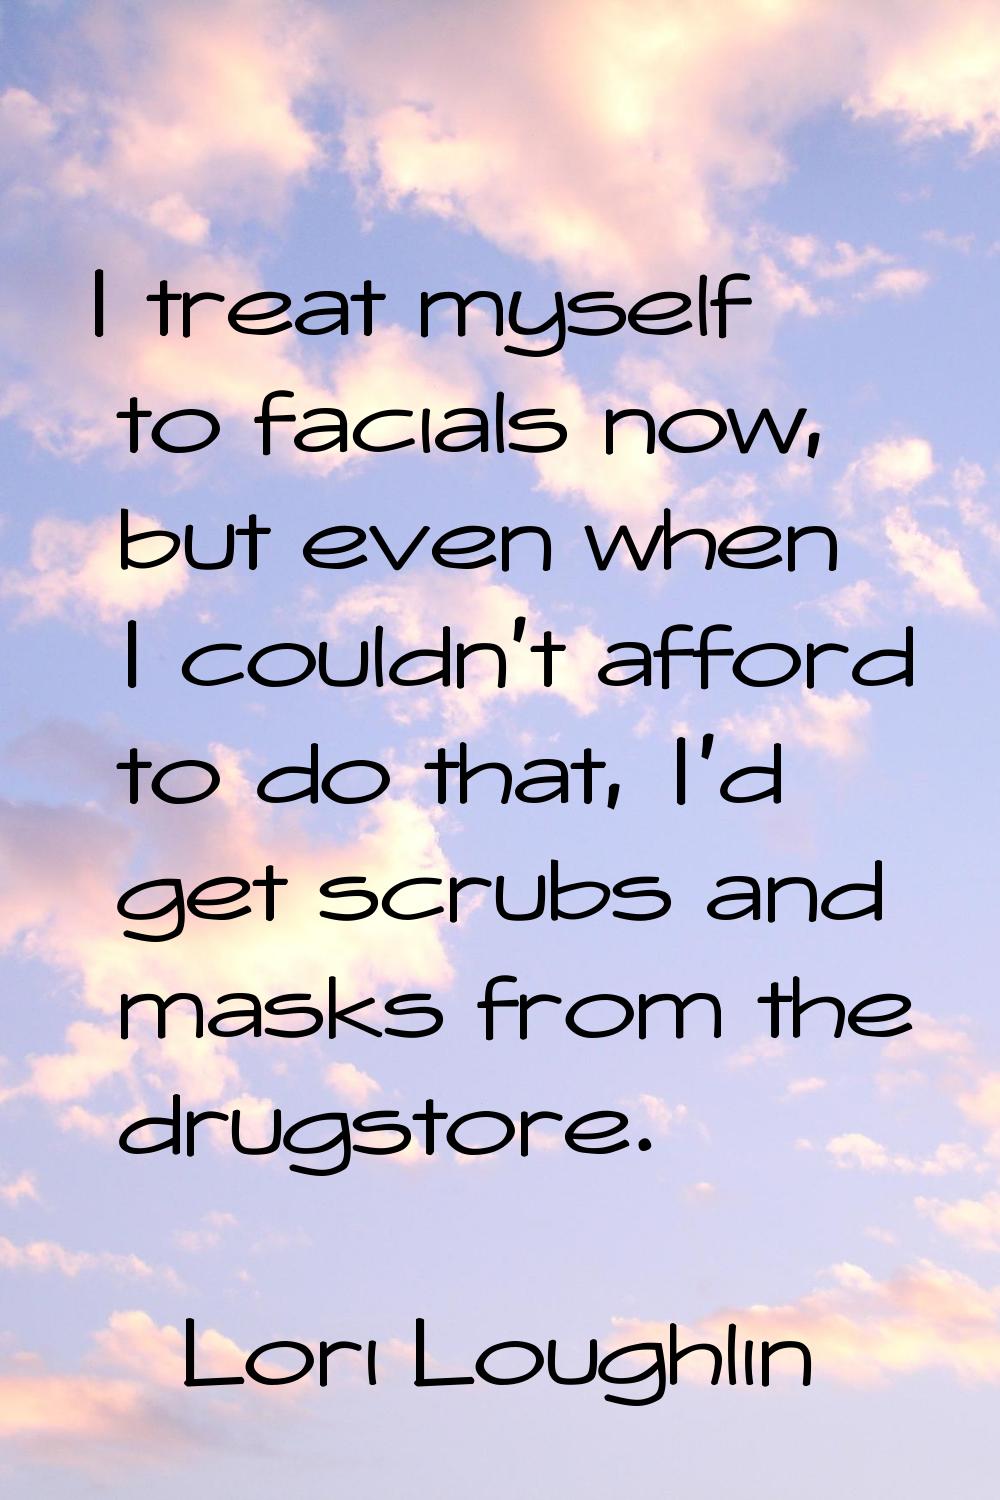 I treat myself to facials now, but even when I couldn't afford to do that, I'd get scrubs and masks